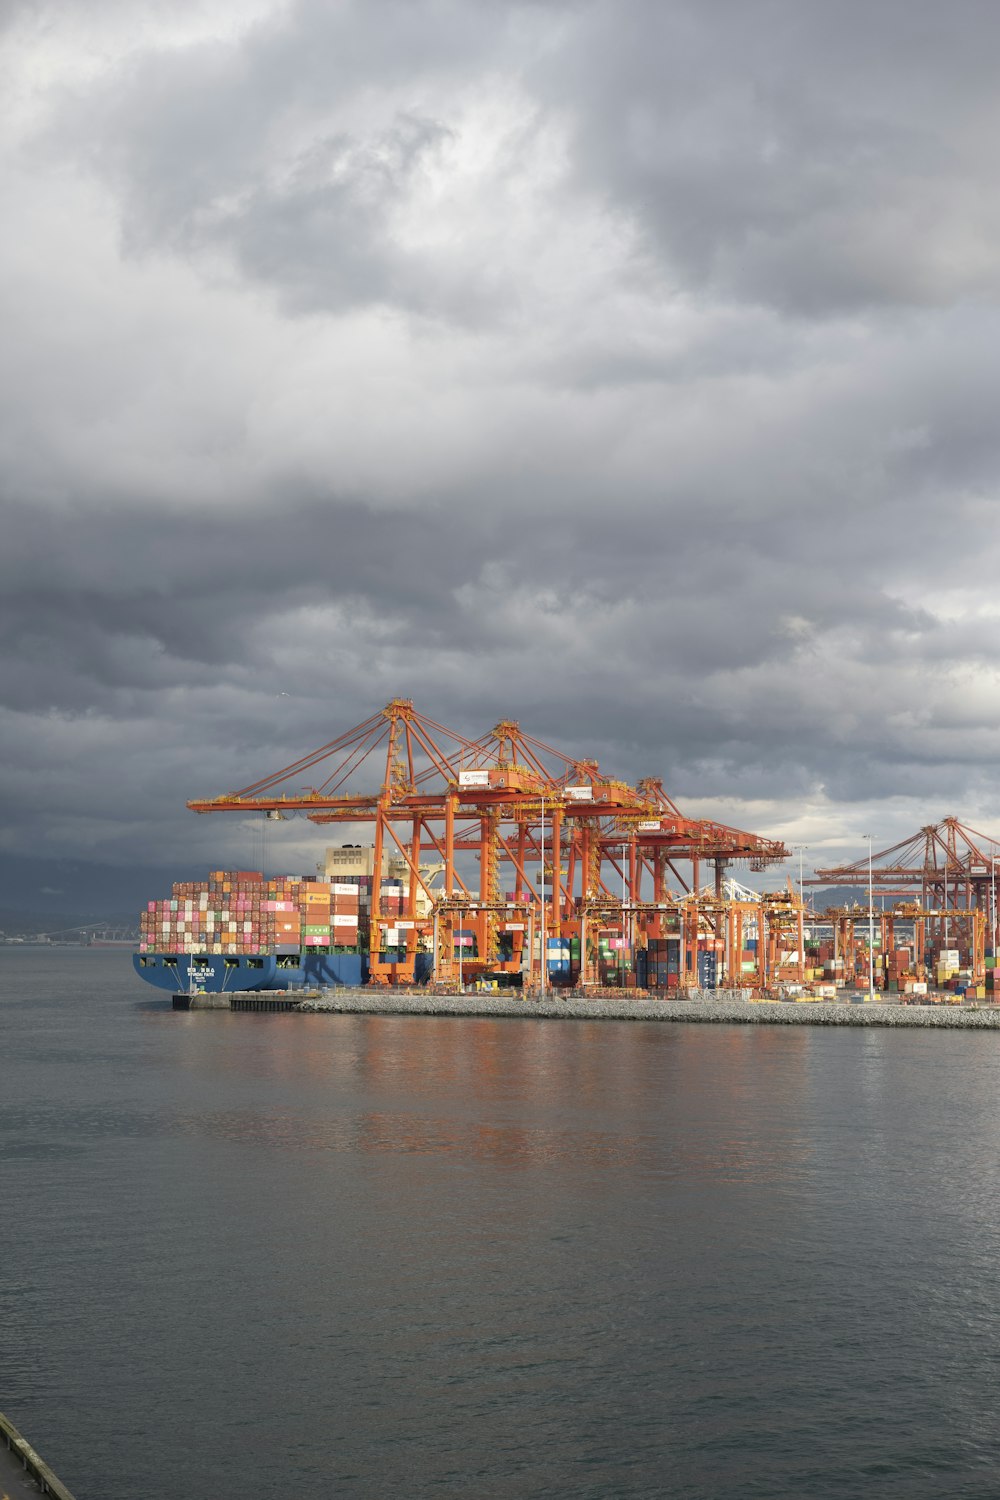 a large cargo ship in the water under a cloudy sky